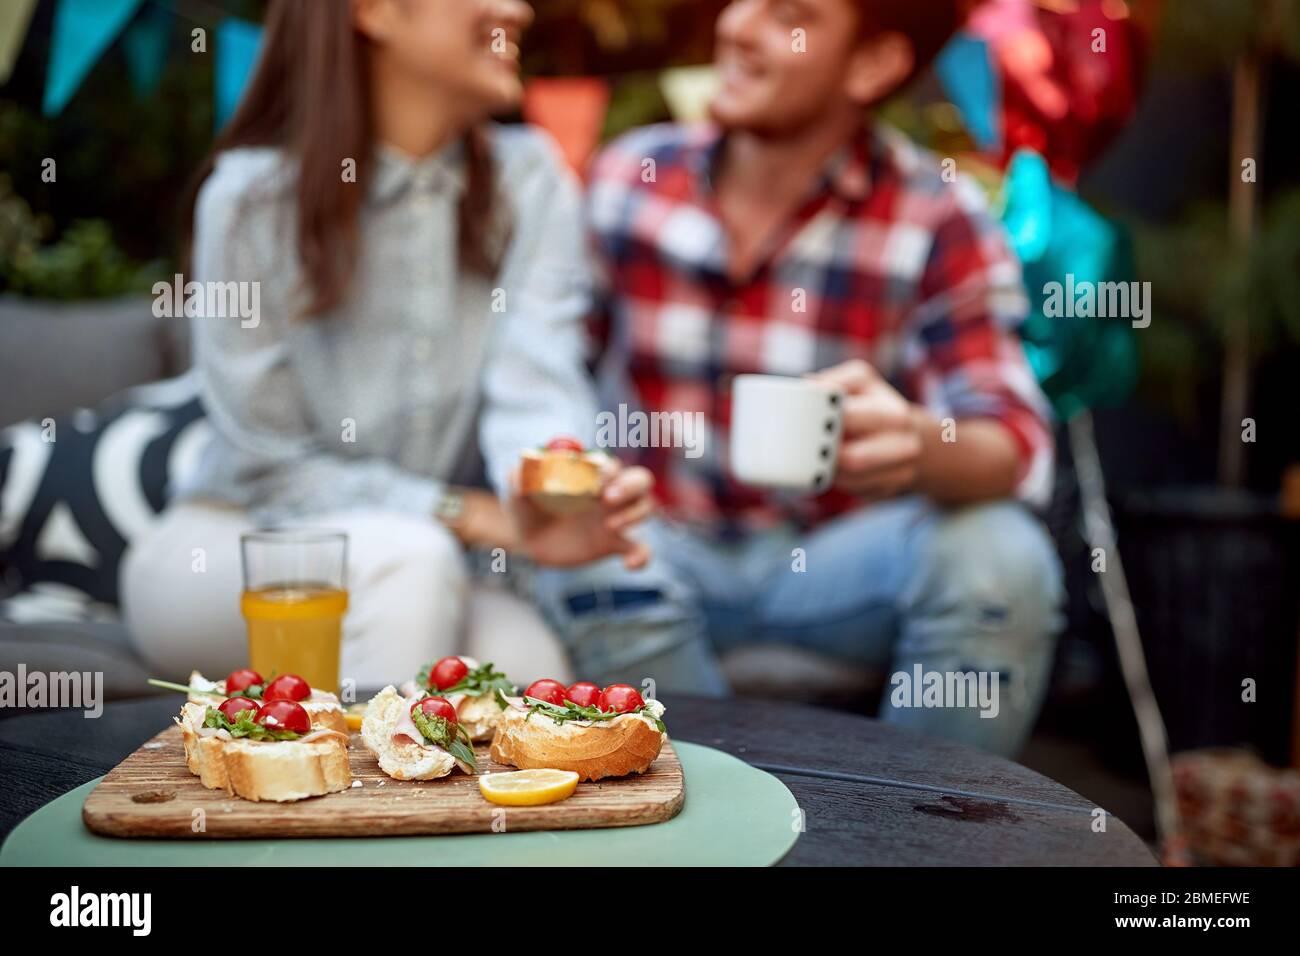 focus on sandwiches with cherry tomato and orange juice with couple in the background out oif focus talking, smiling. People, food and beverage Stock Photo